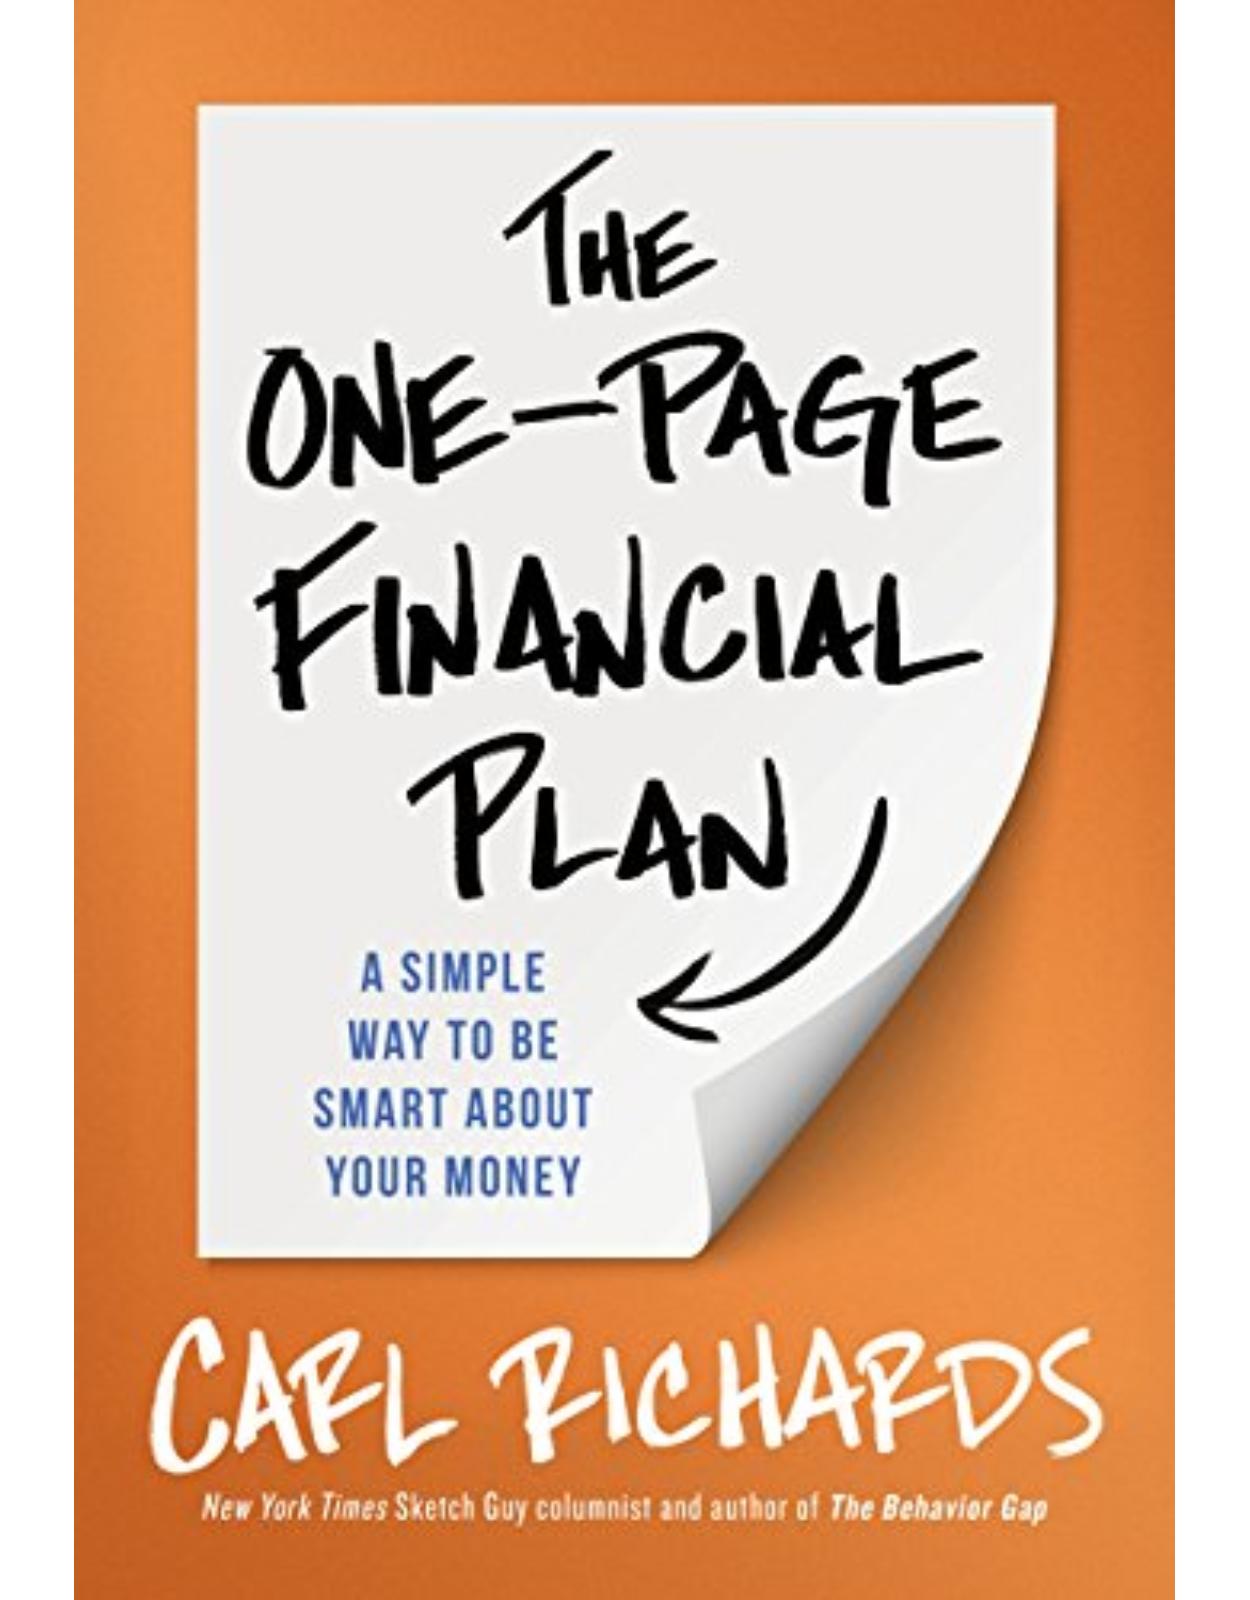 The One-Page Financial Plan : A Simple Way to be Smart About Your Money